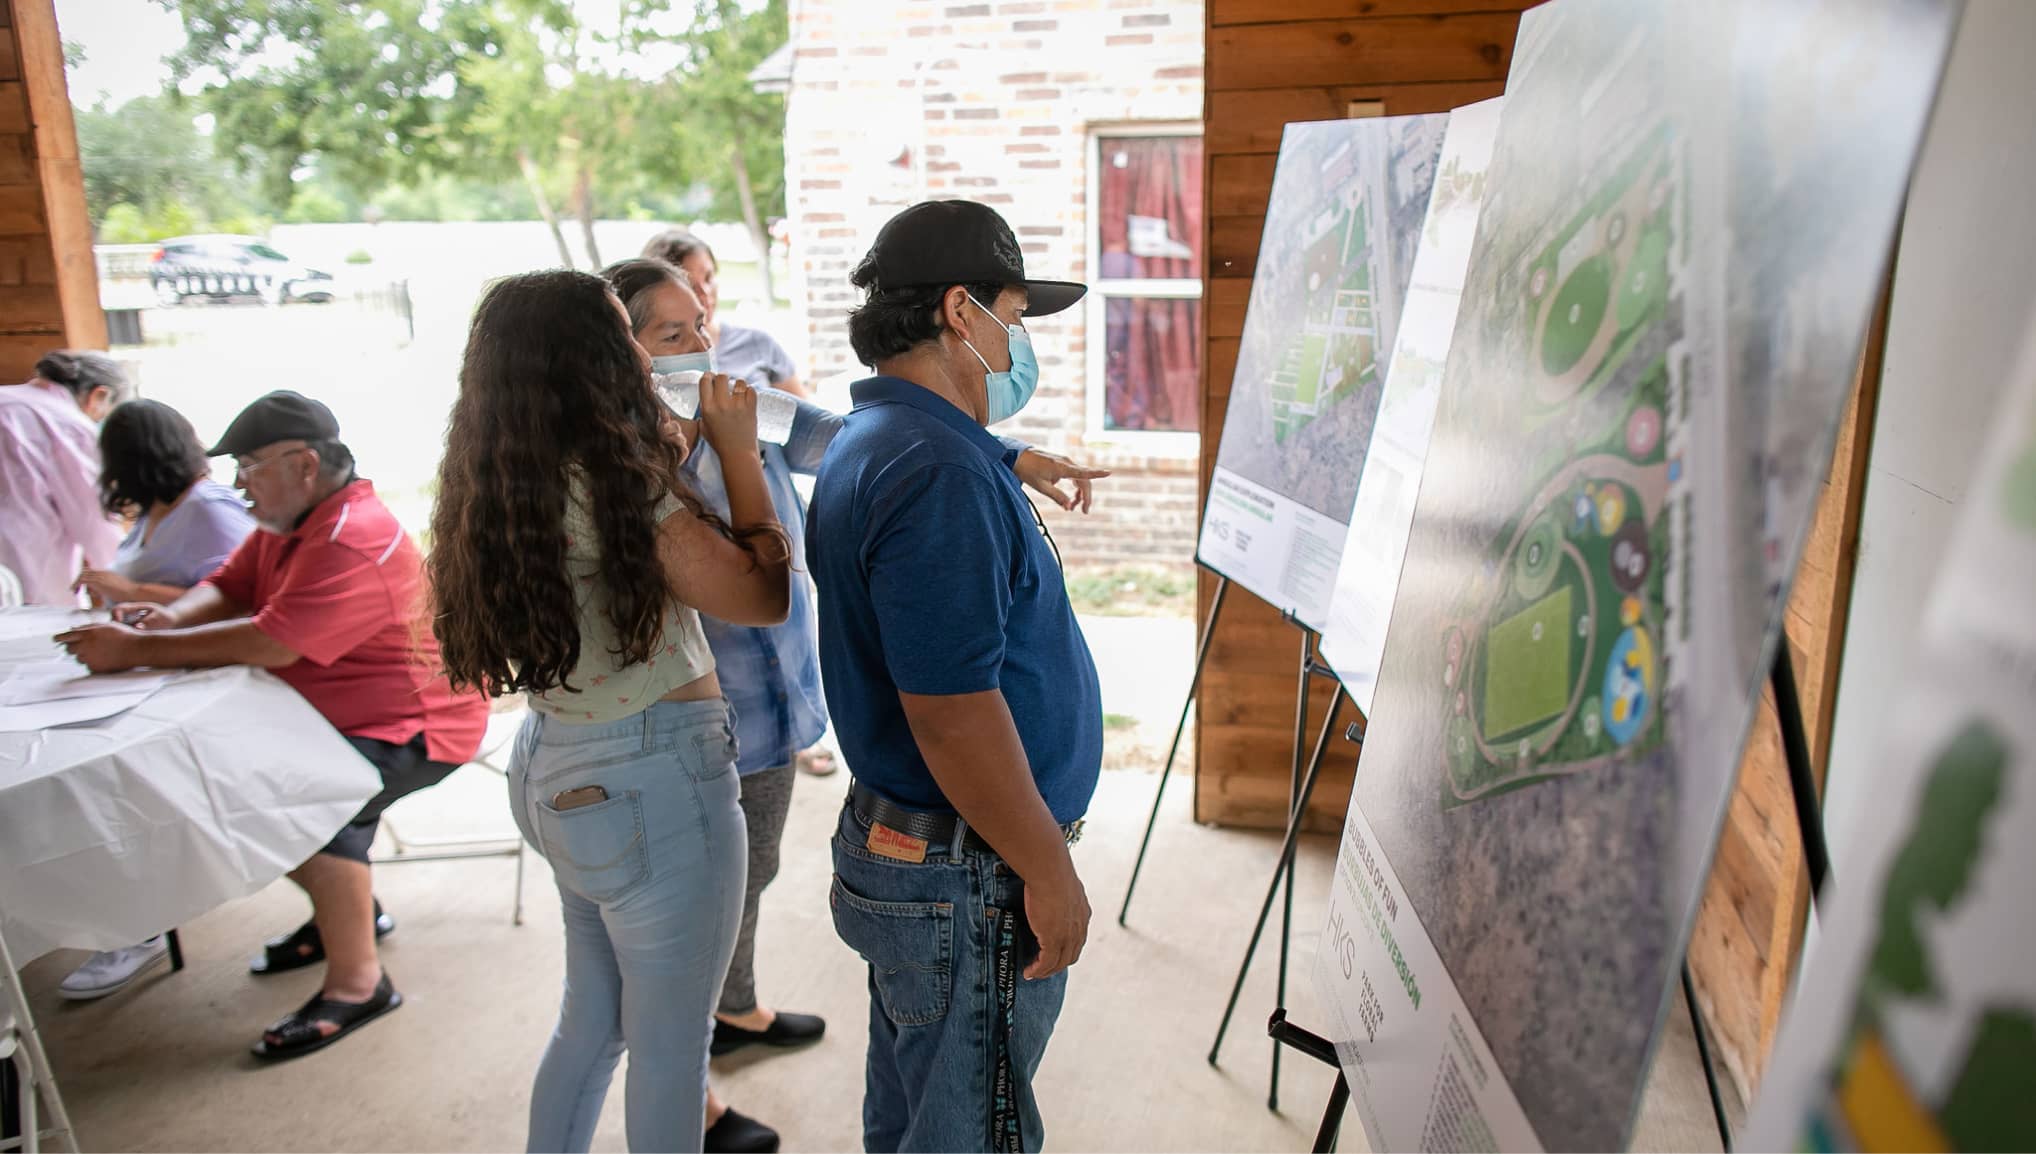 Floral Farms residents review three park concepts before providing feedback on elements that they would like to see included in the final park concept. Many of them brought their children and grandchildren to the meeting, so they too could have a say in the process.